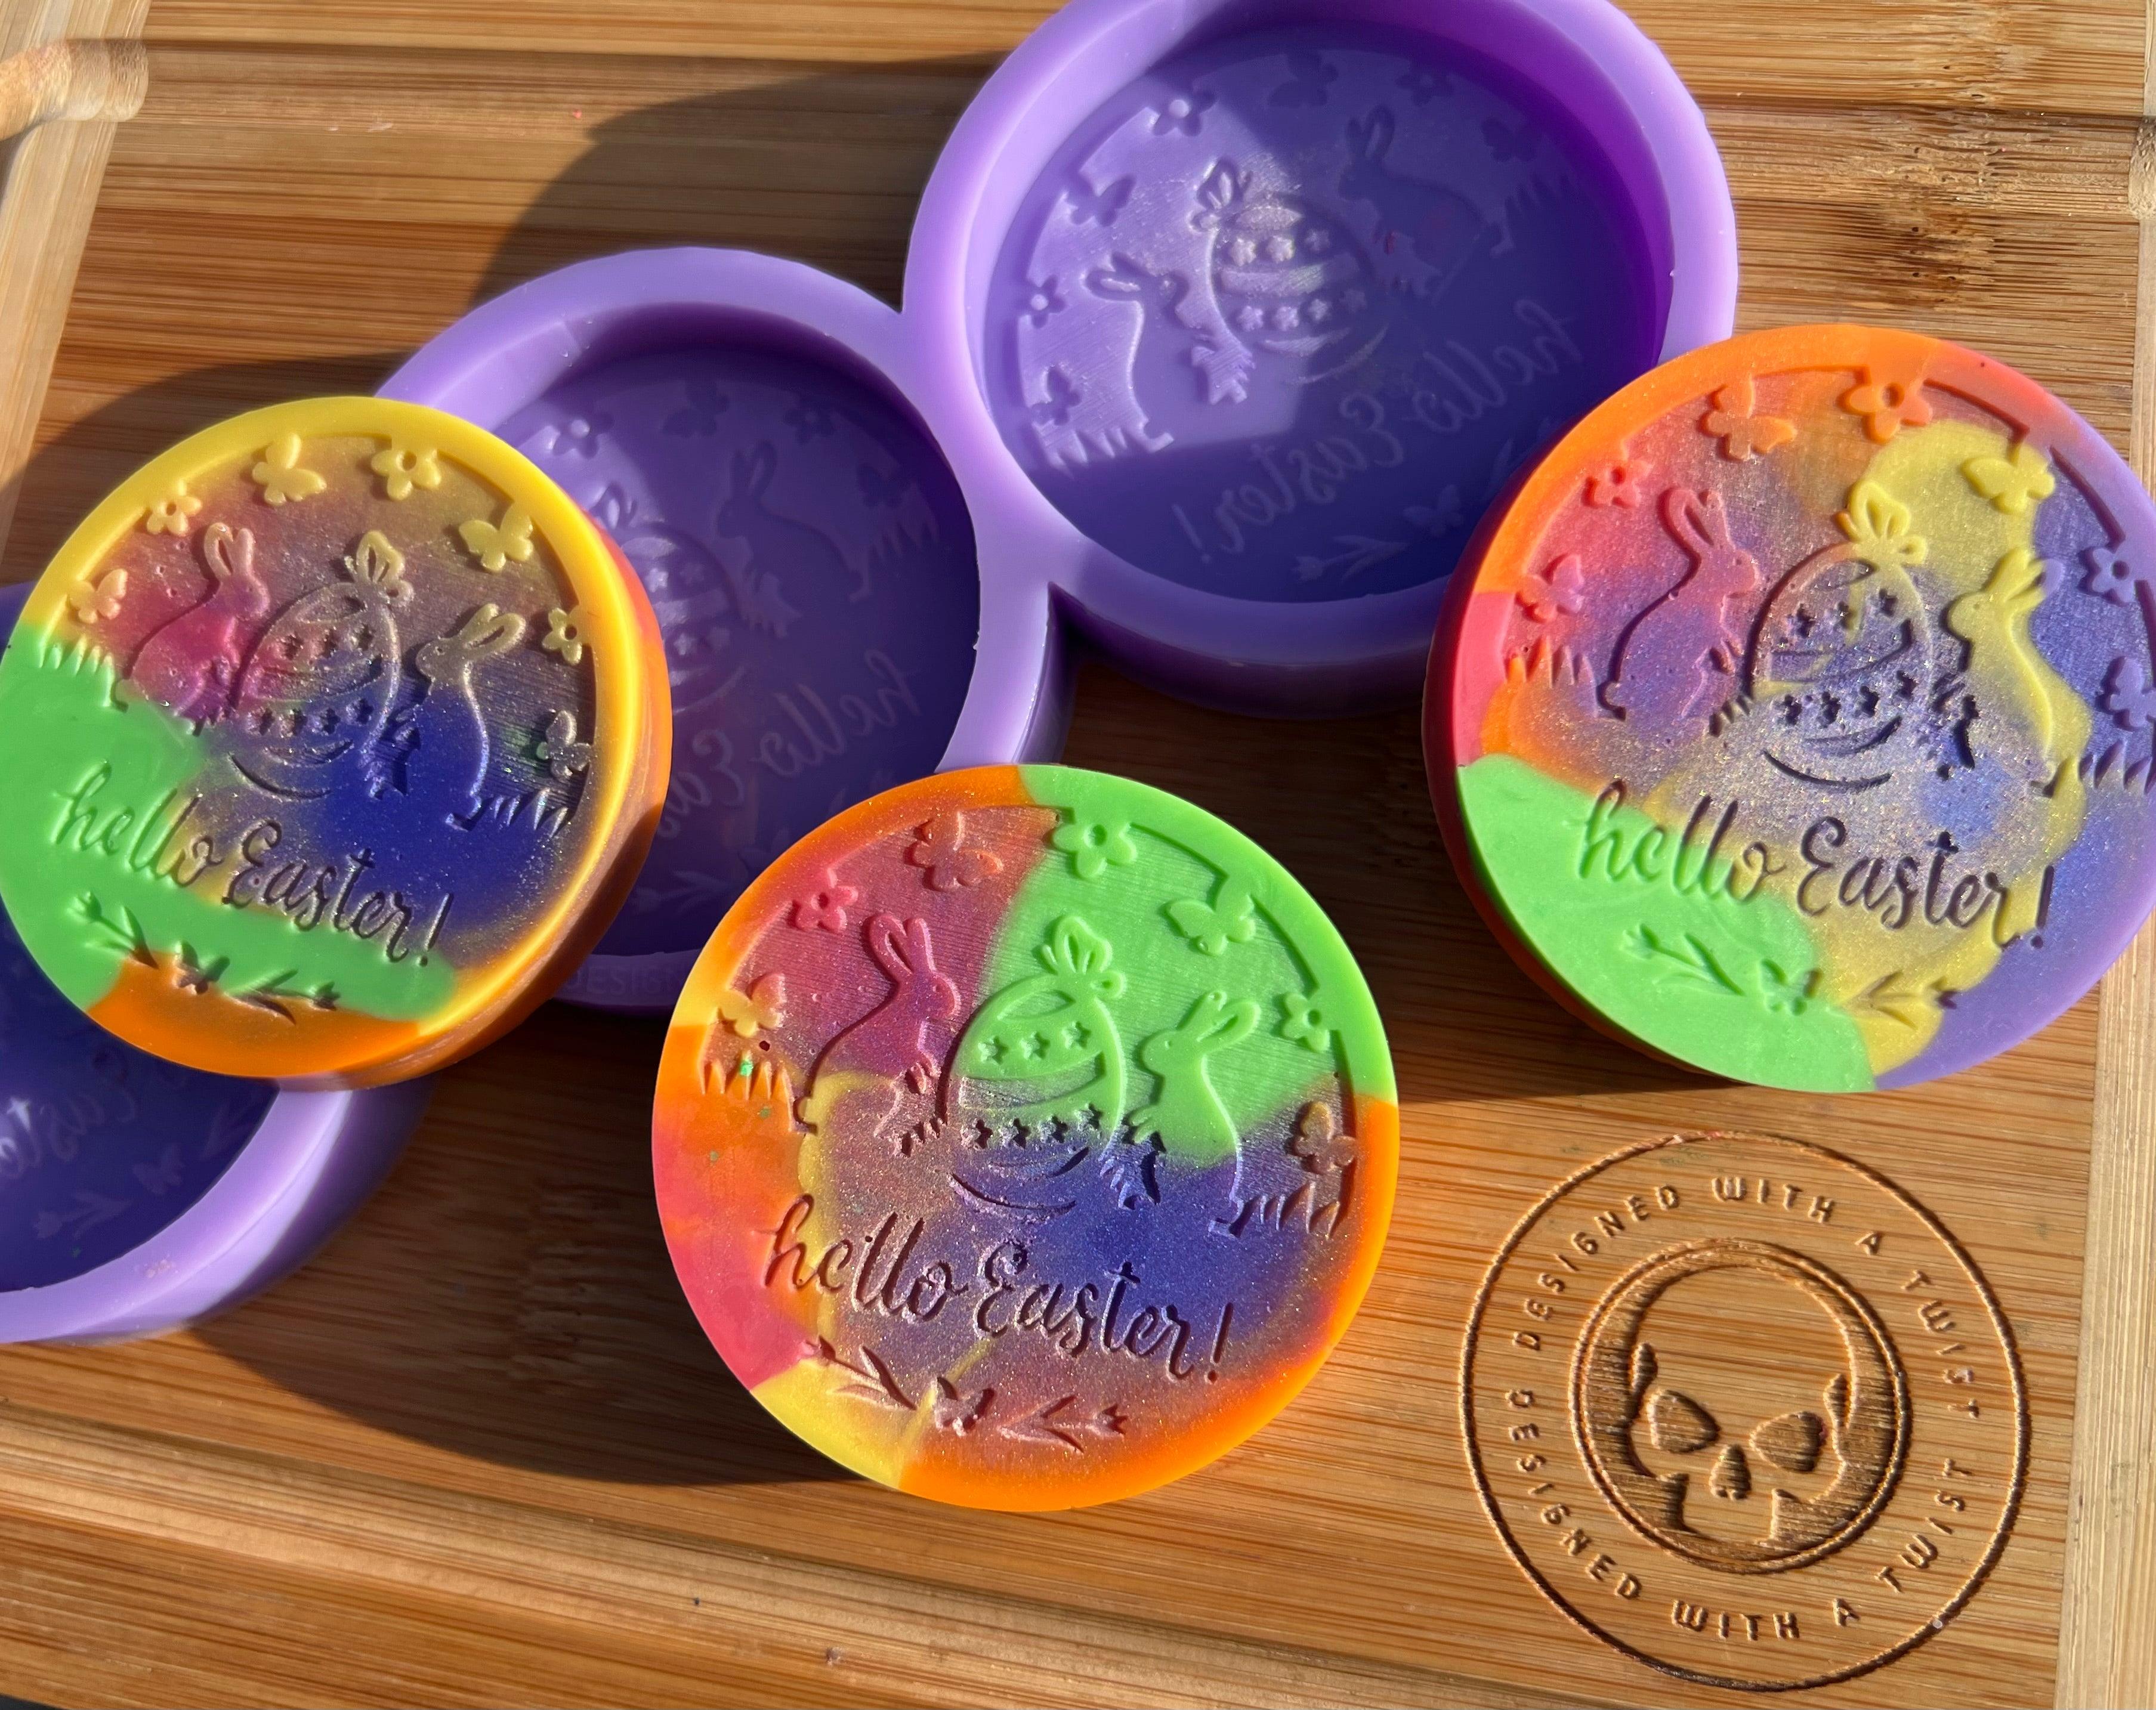 Hello Easter Wax Melt Silicone Mold - Designed with a Twist - Top quality silicone molds made in the UK.